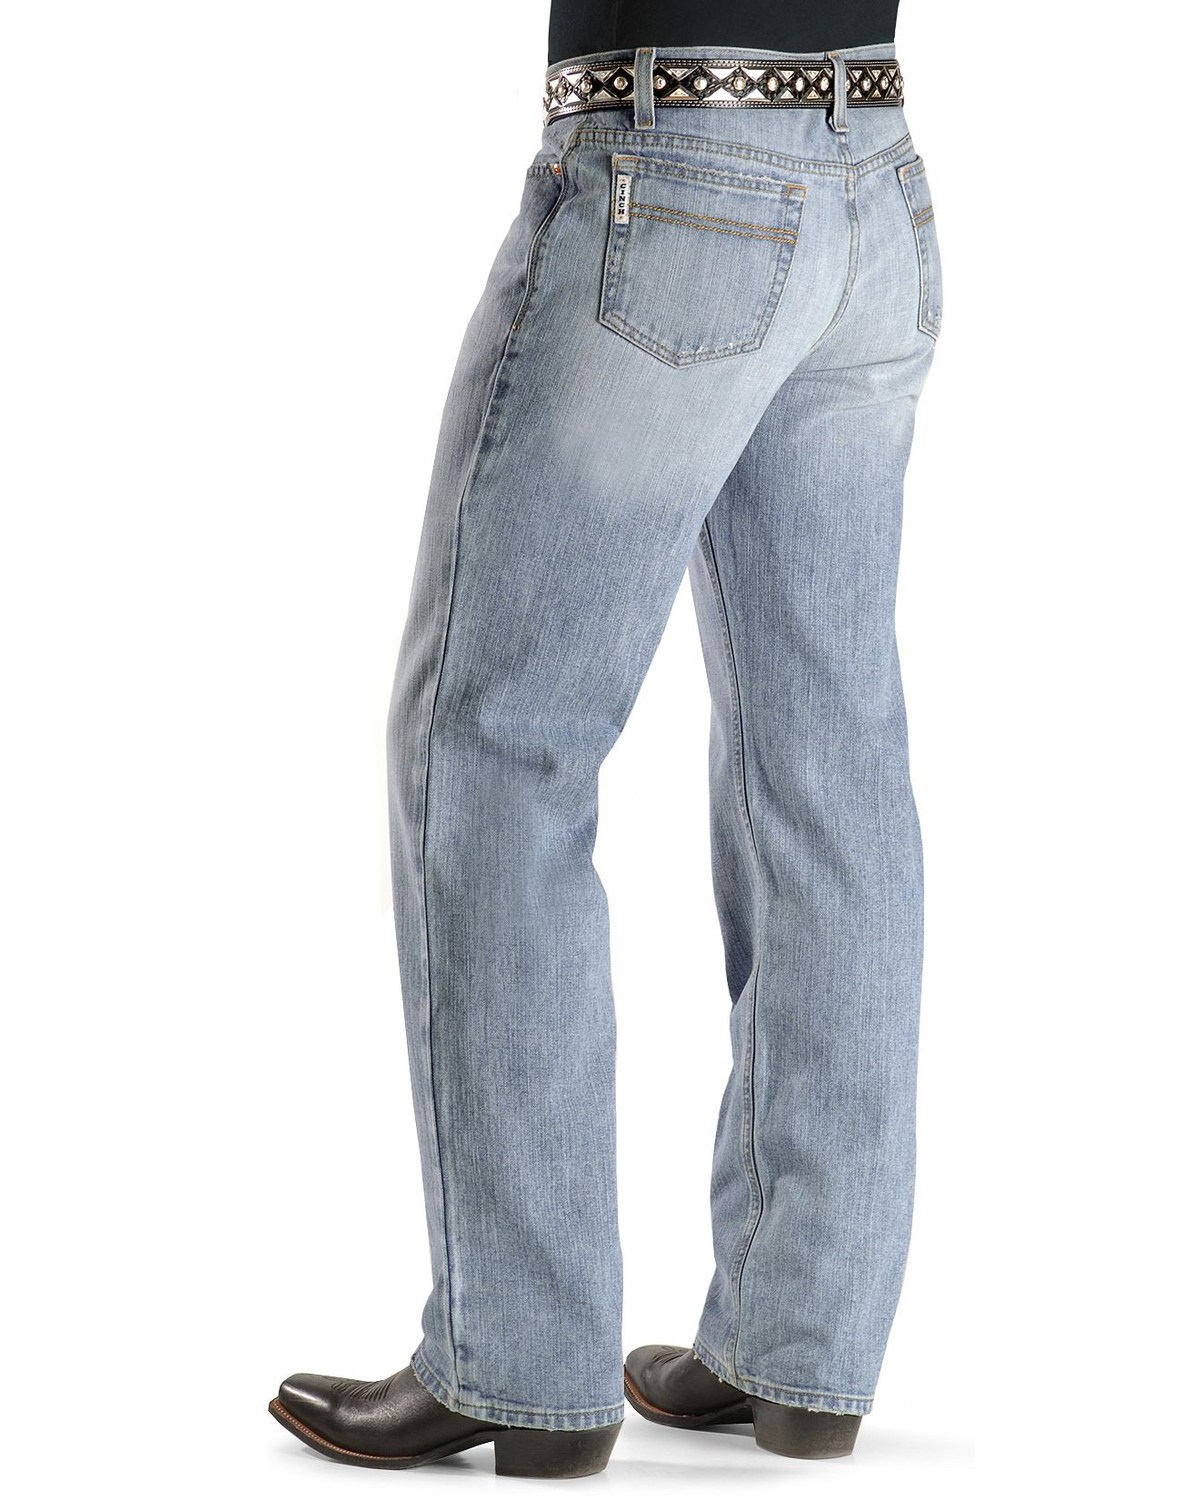 Cinch Men's White Label Relaxed Fit Stonewash Jeans